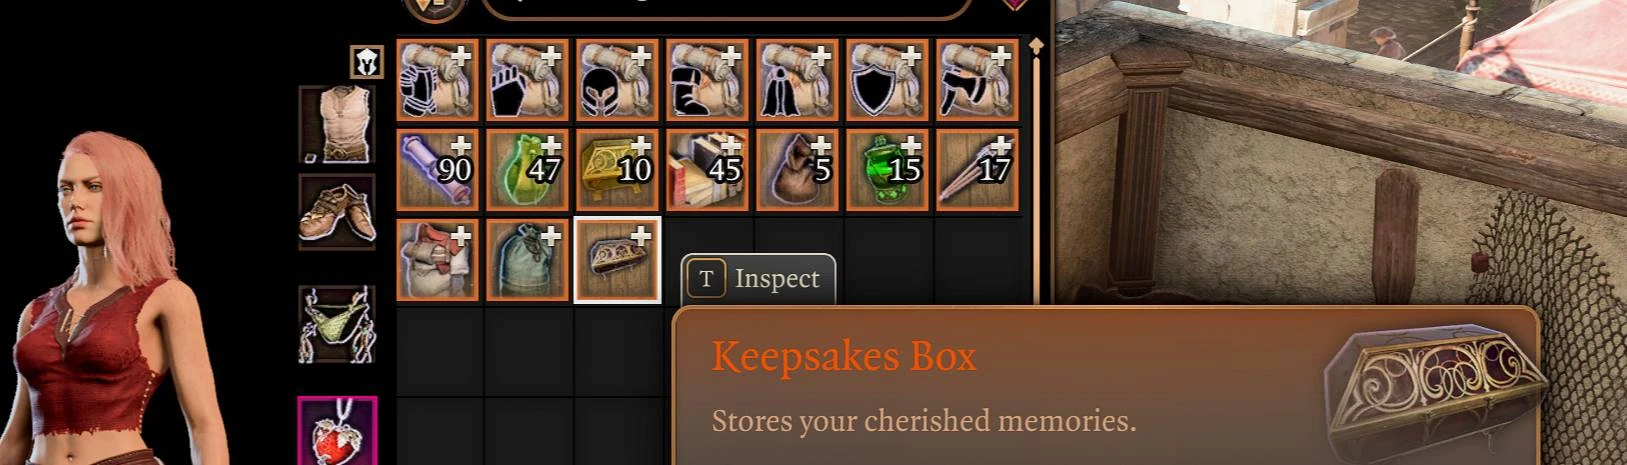 For other patch sellers, how do you organize your inventory